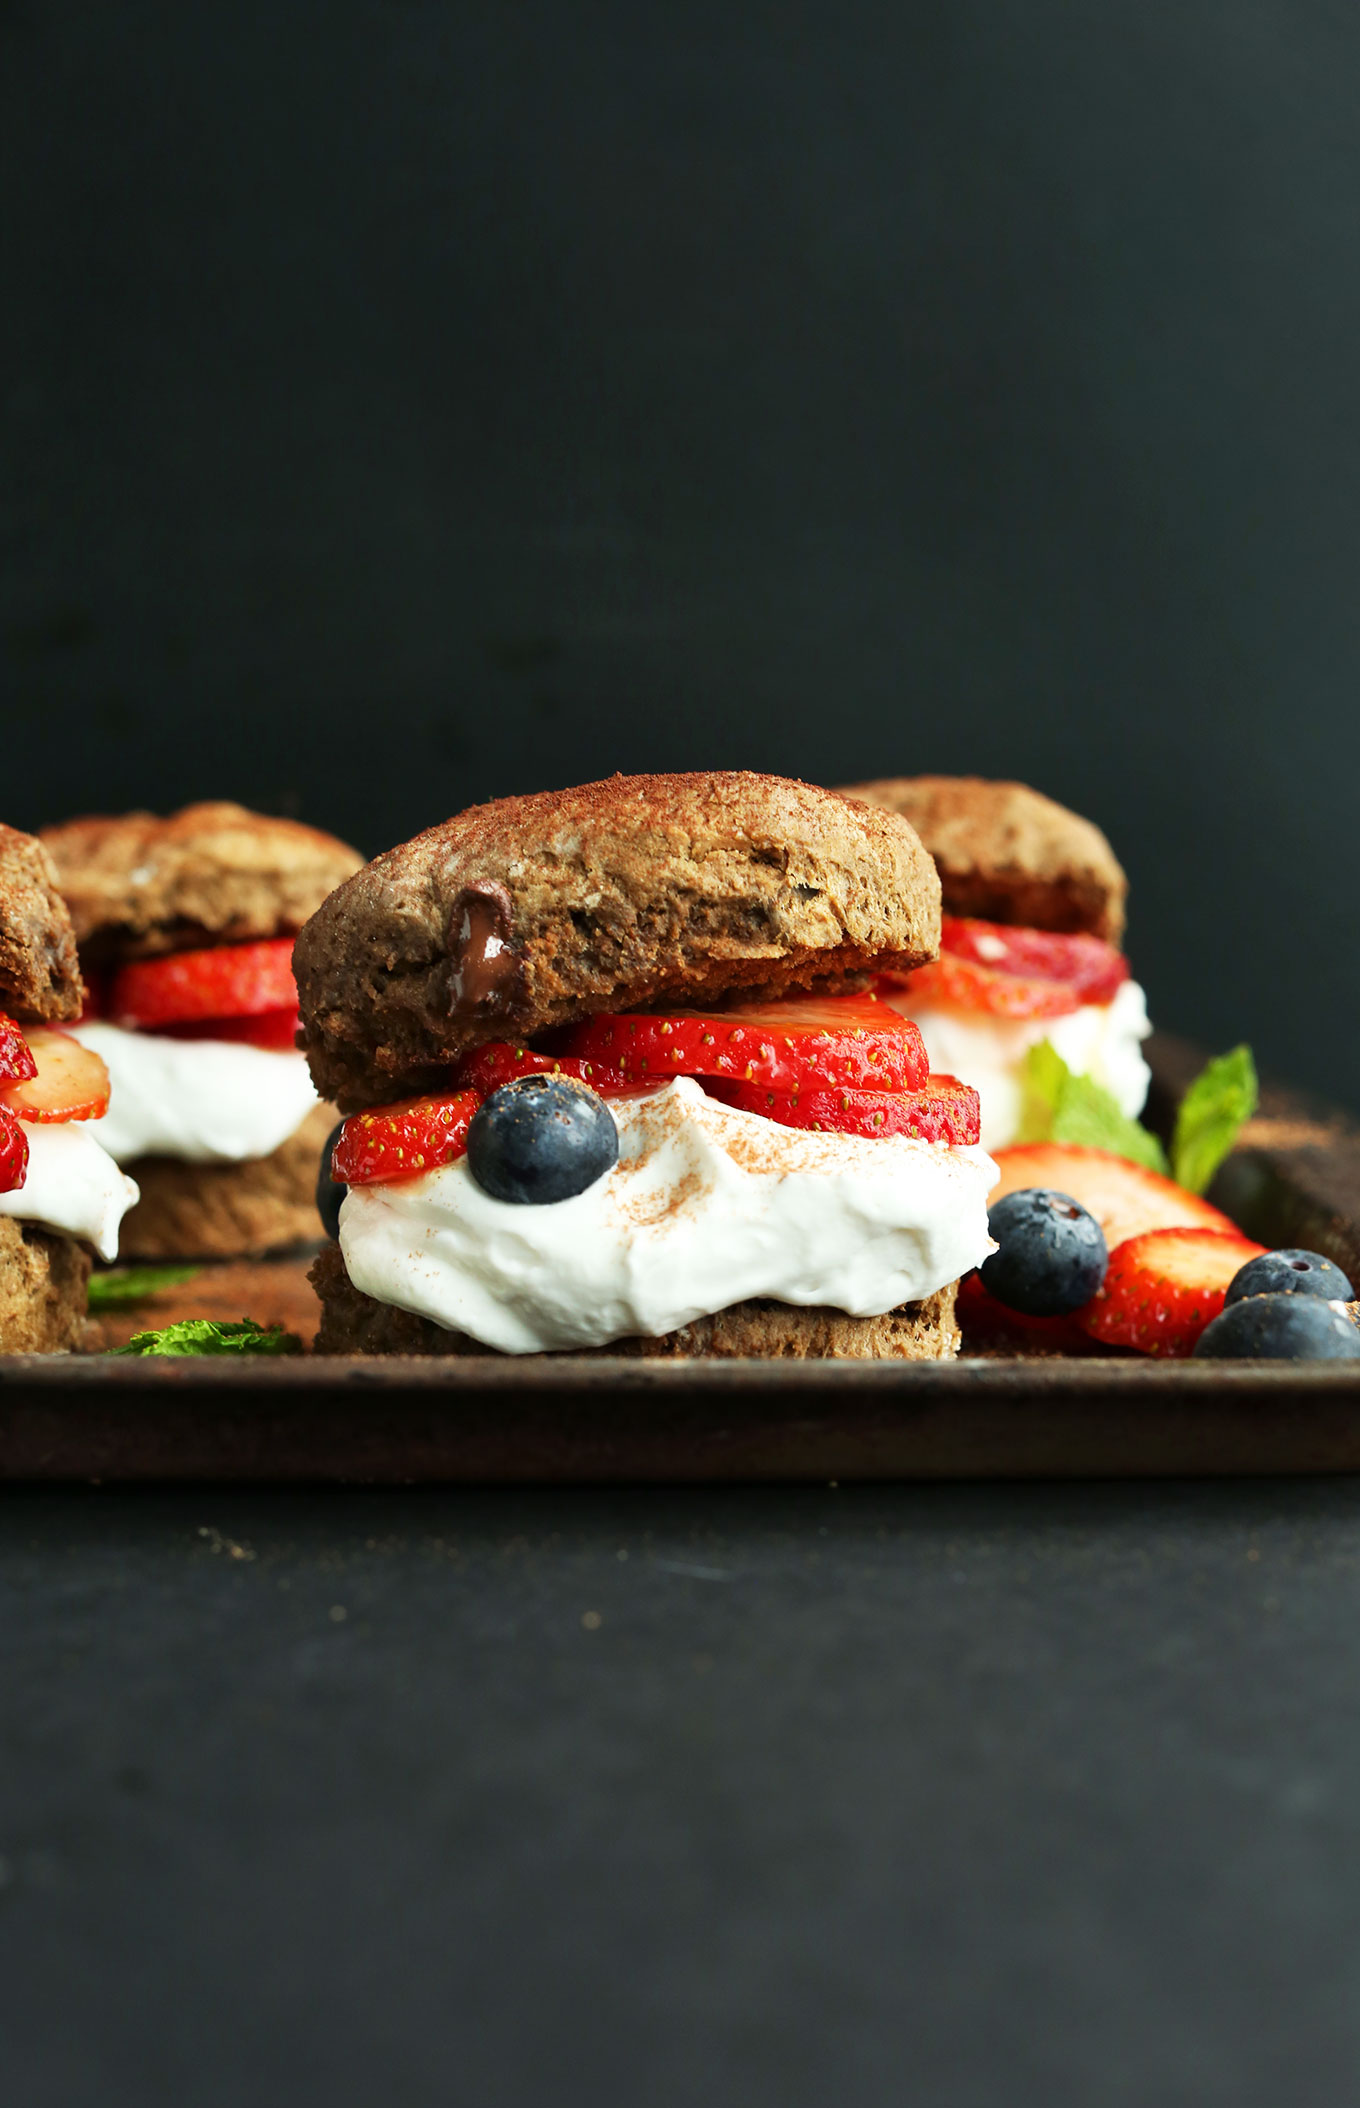 Easy-to-make vegan Chocolate Shortcakes filled with coconut whip, fresh strawberries, and fresh blueberries